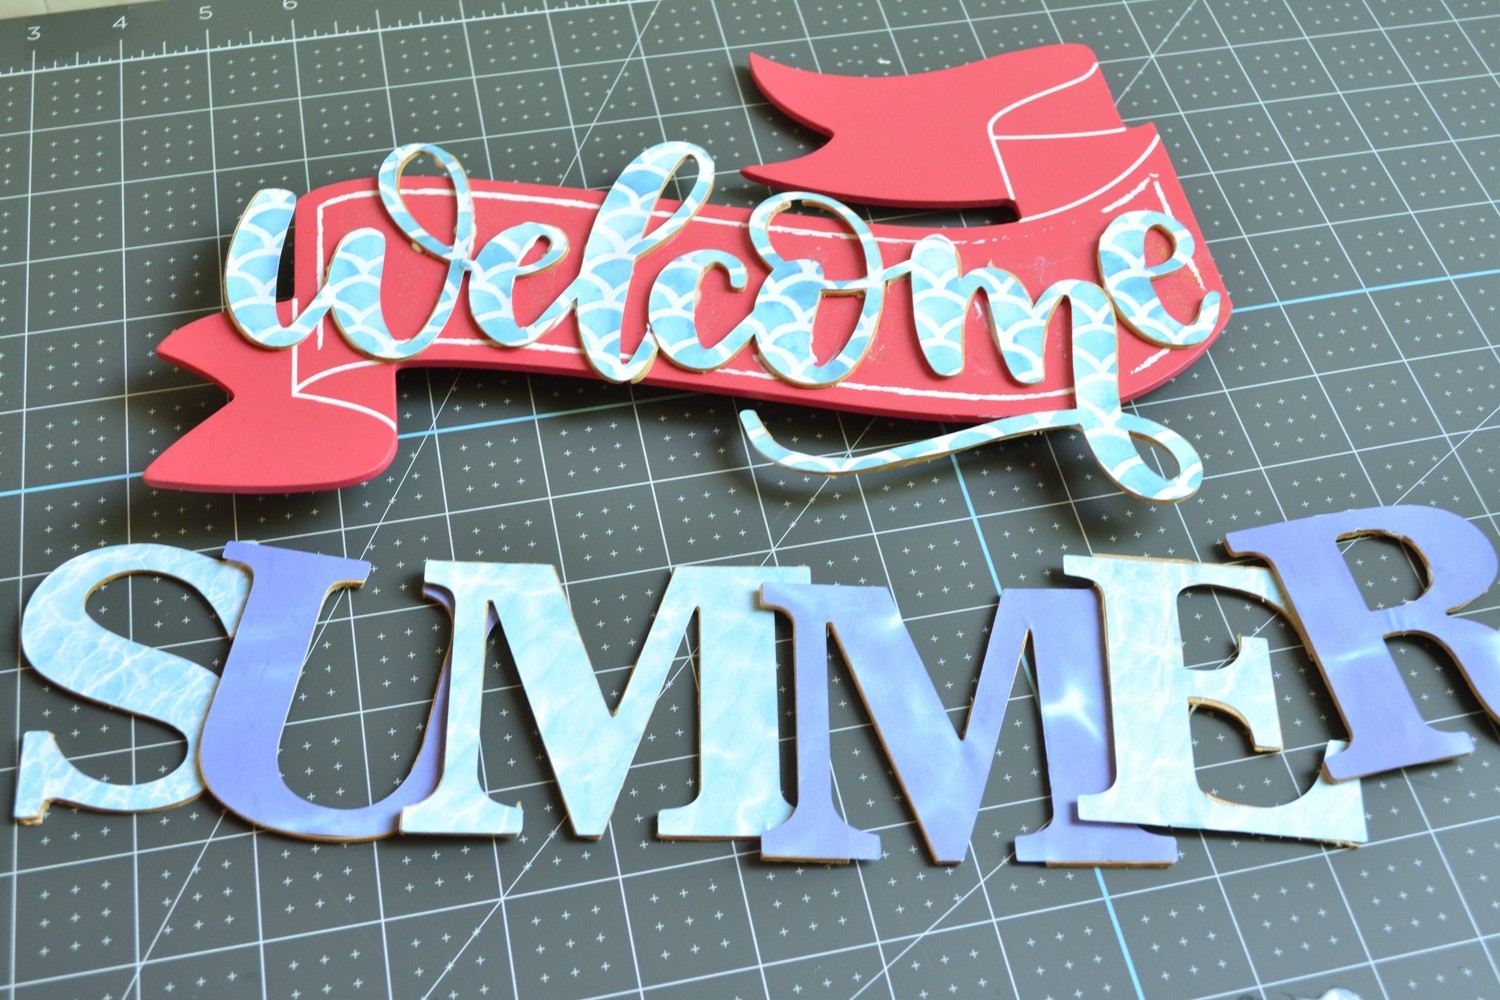 Welcome Summer Wreath - The Cards We Drew